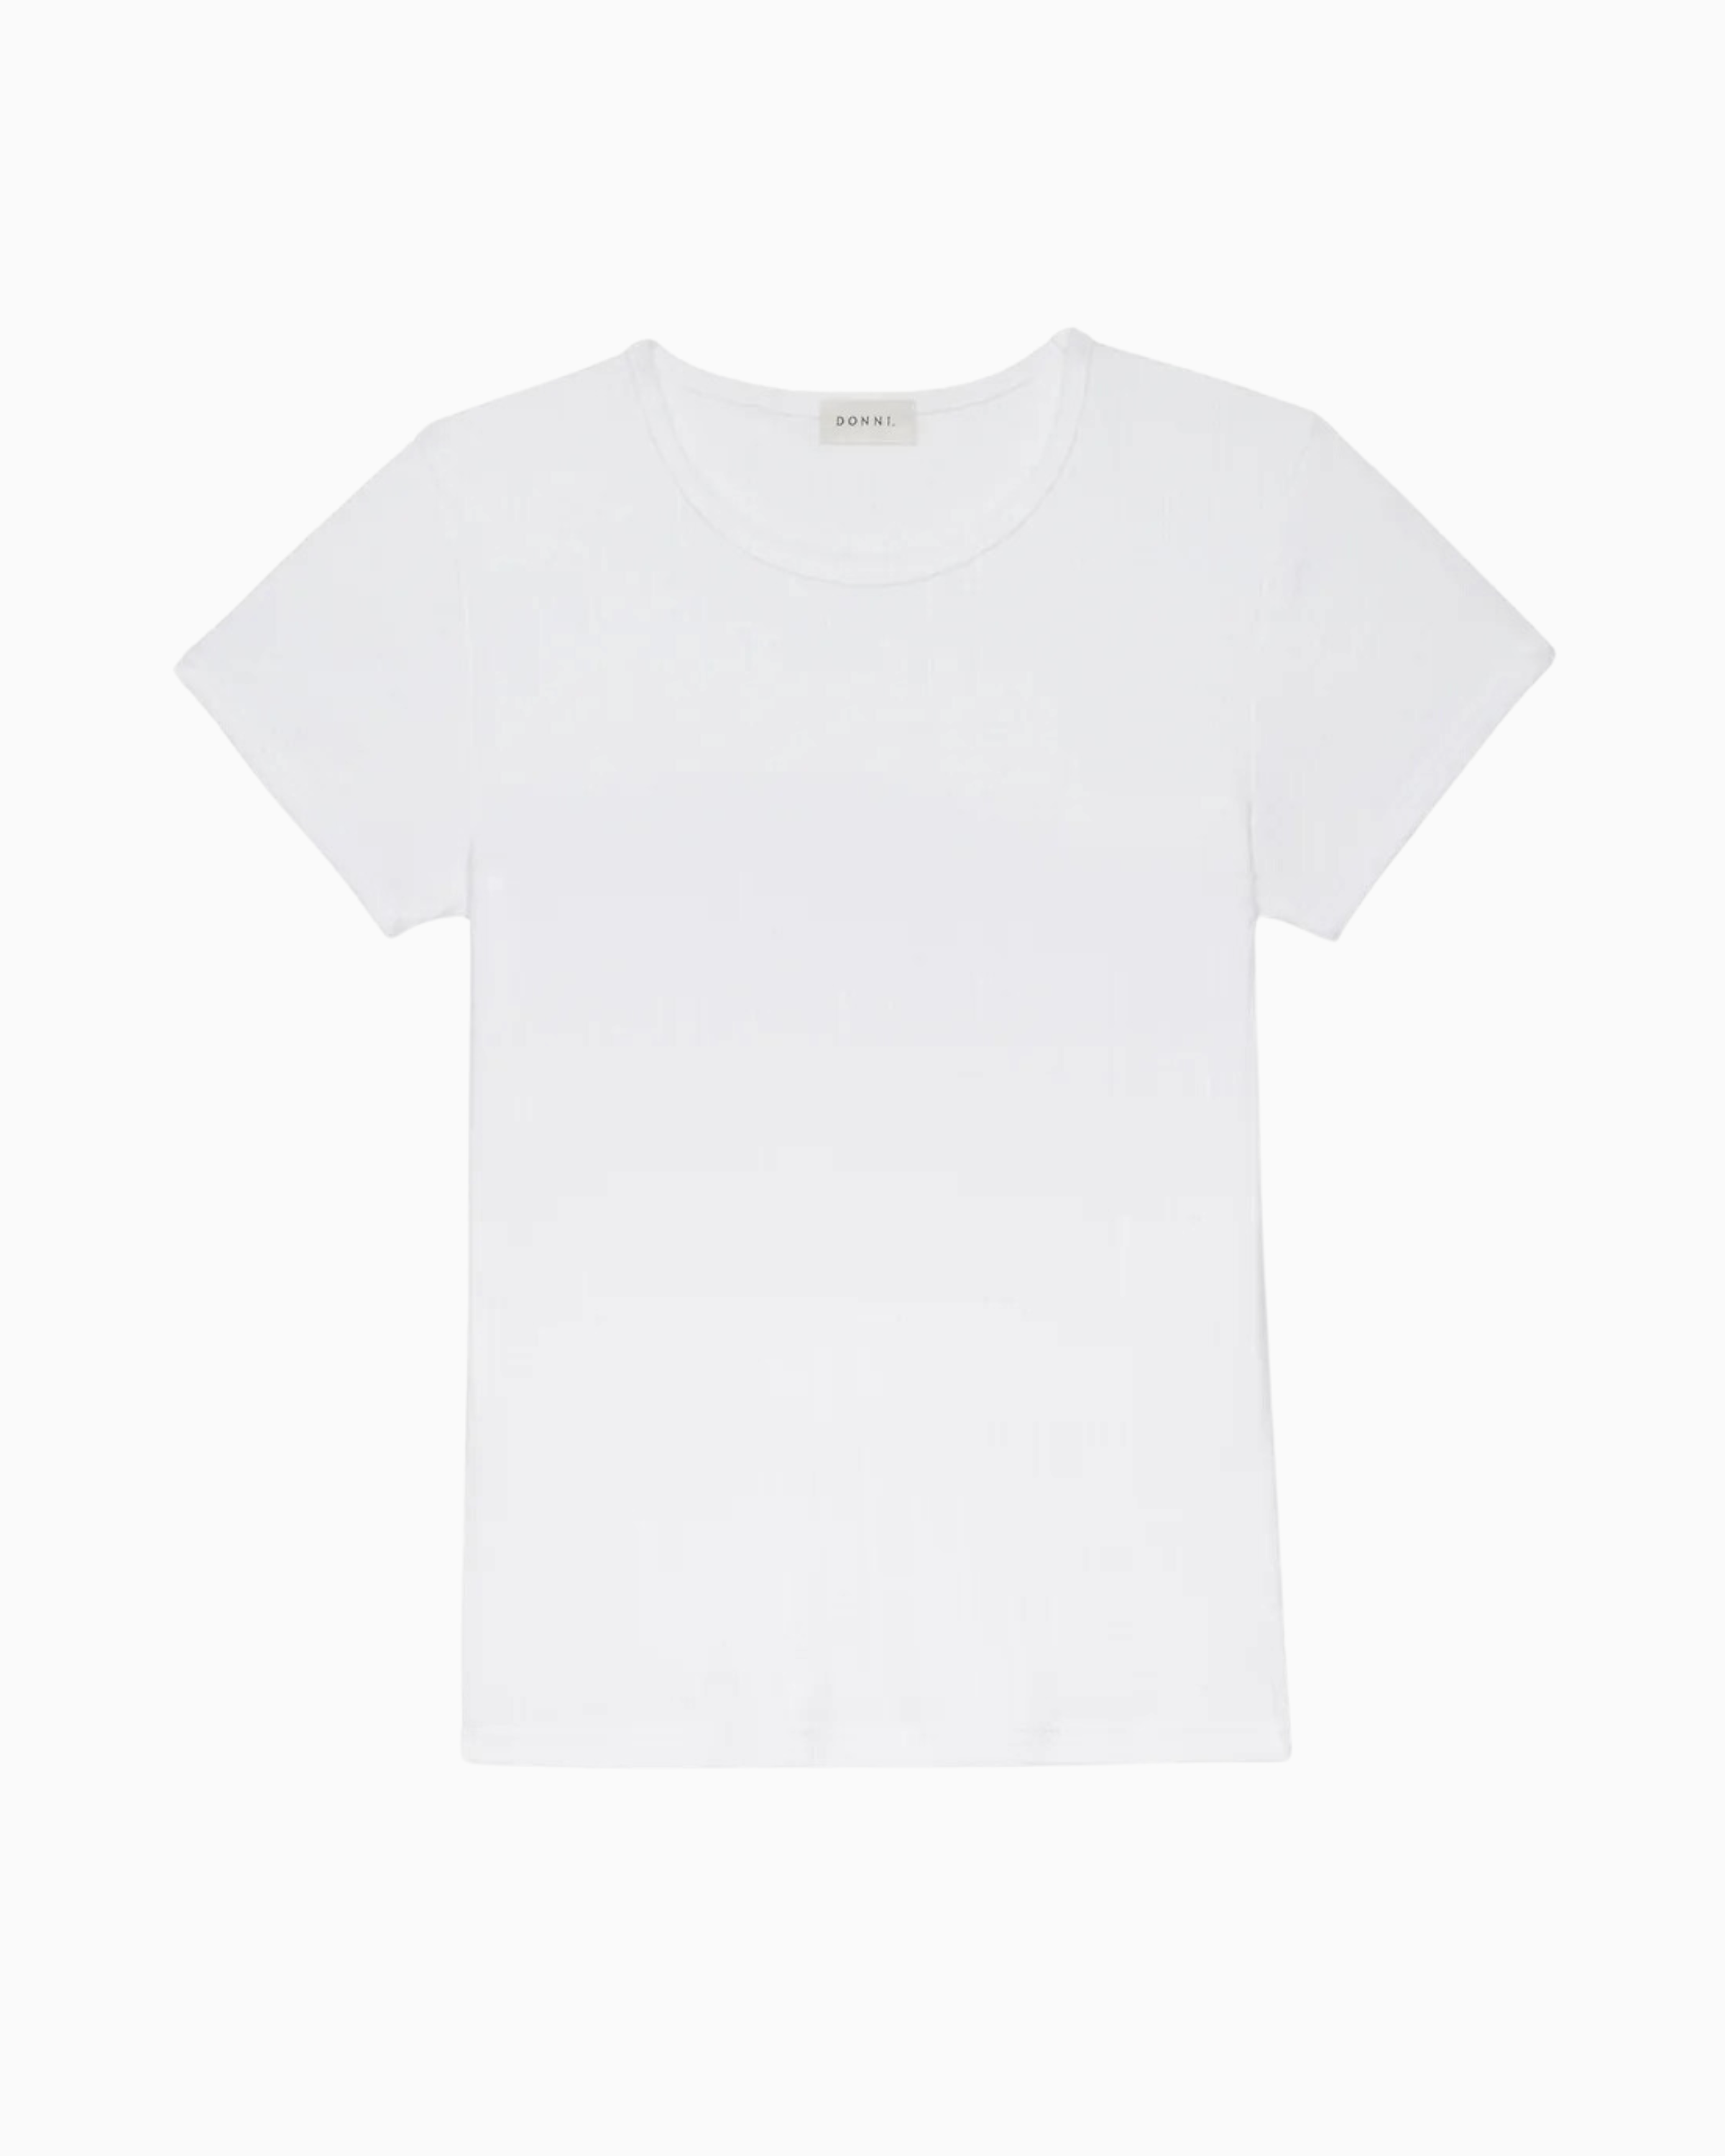 Donni Pointelle Baby Tee in Powder